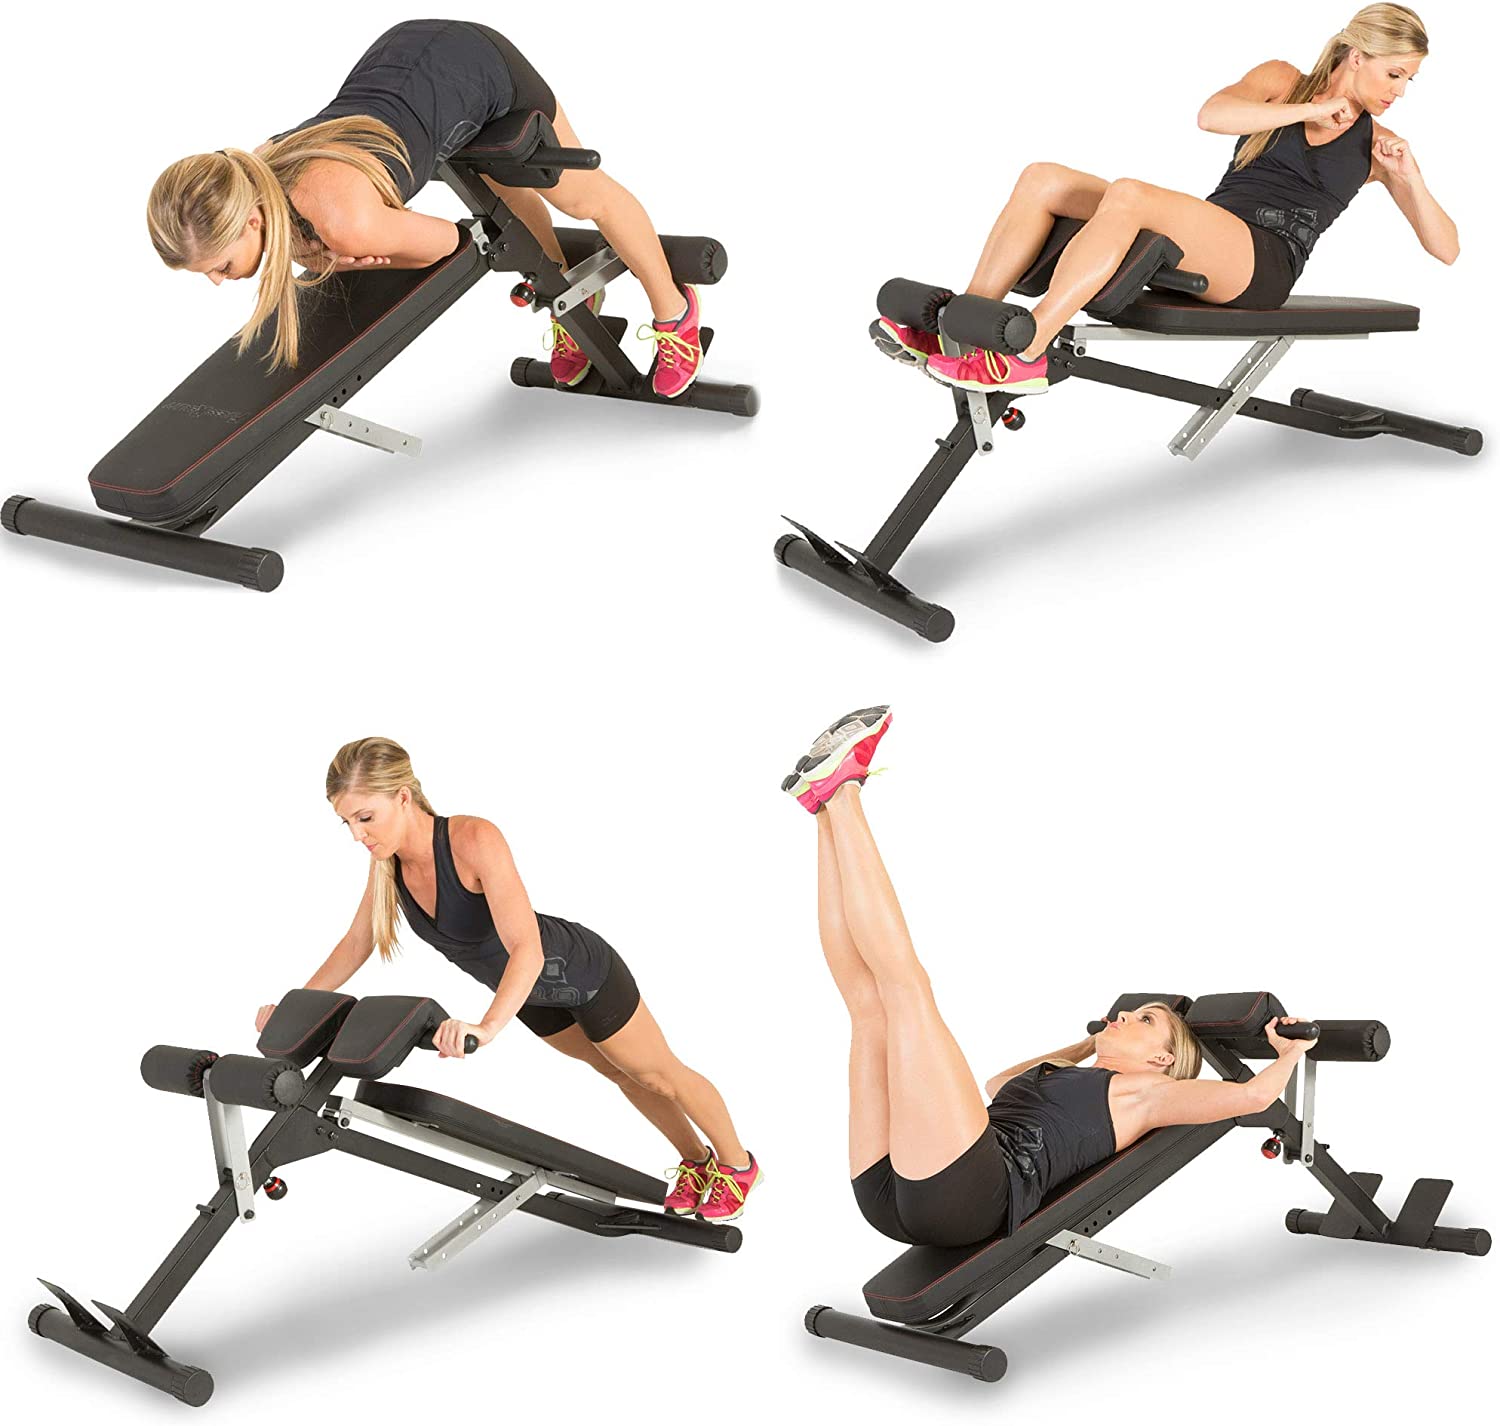 Fitness Reality x-class weight bench for mid section